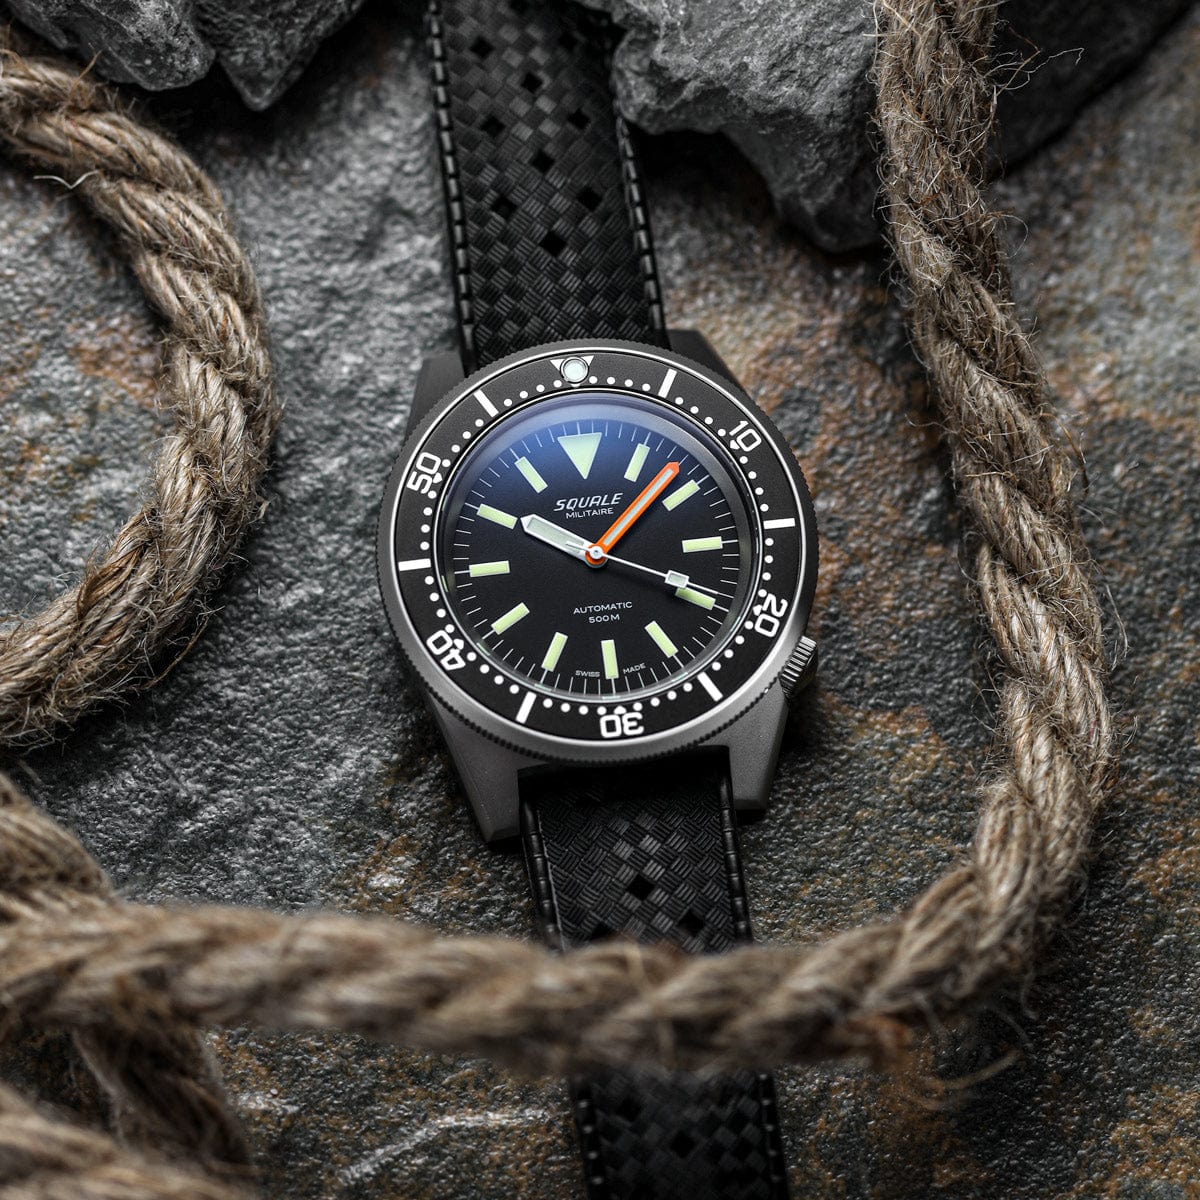 Squale 1521 Militaire Swiss Made Divers Watch - Blasted Case